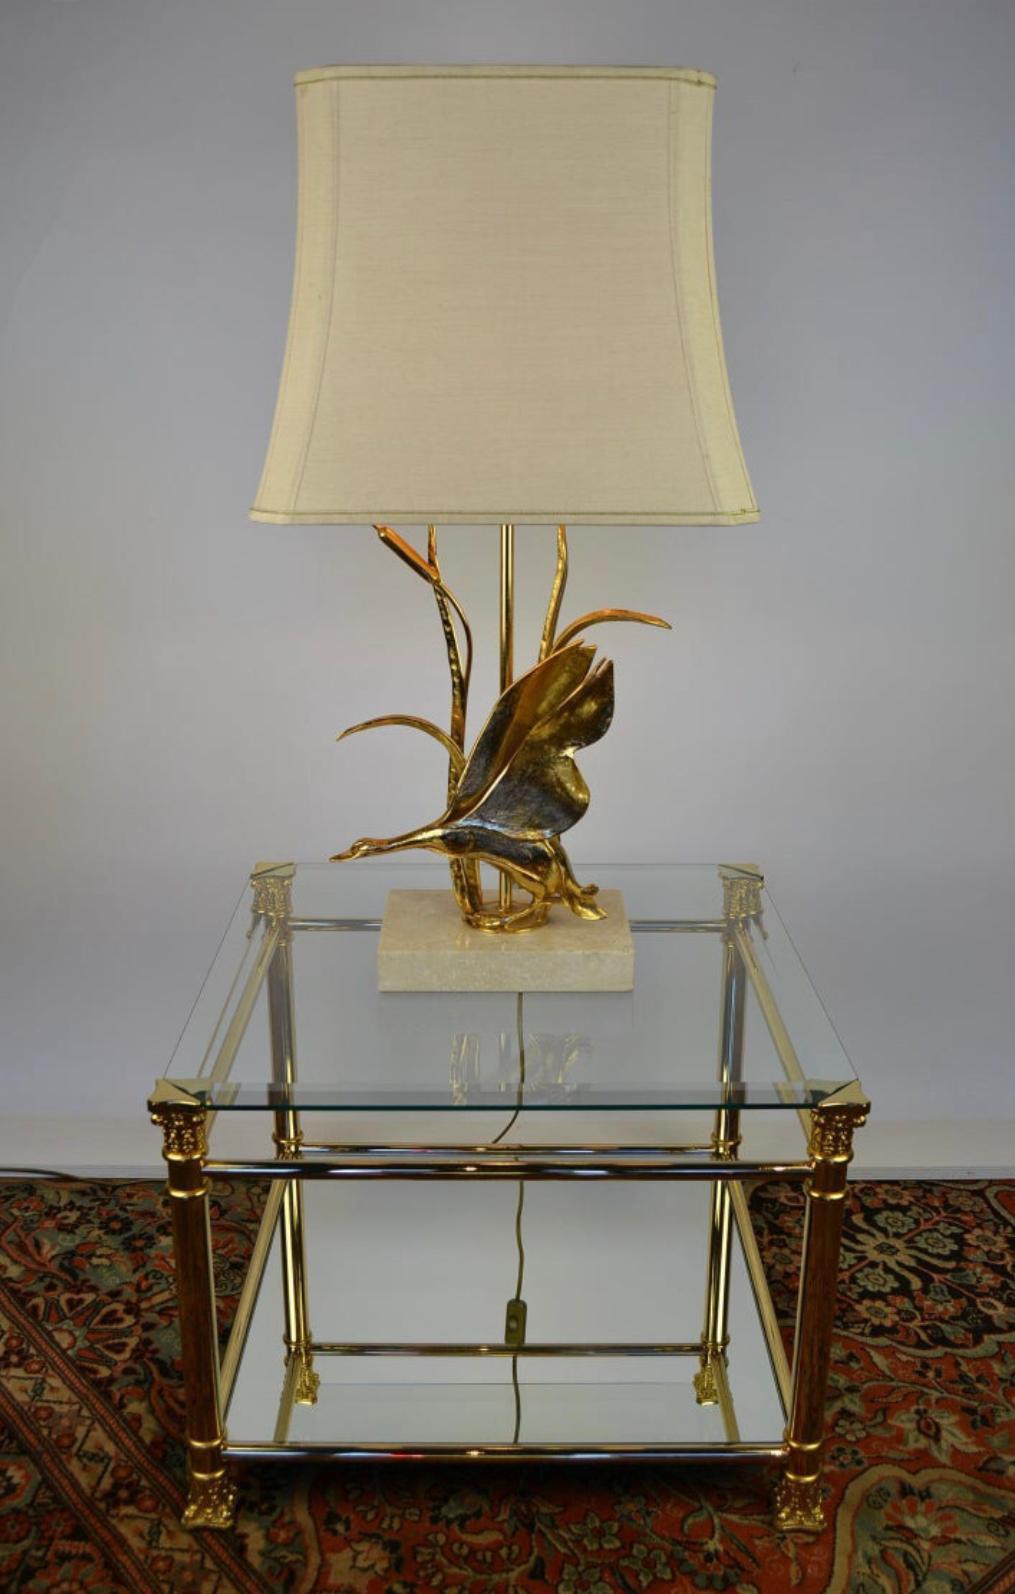 Lanciotto Galeotti Table Lamp with Bird, Italy, 1970s For Sale 10